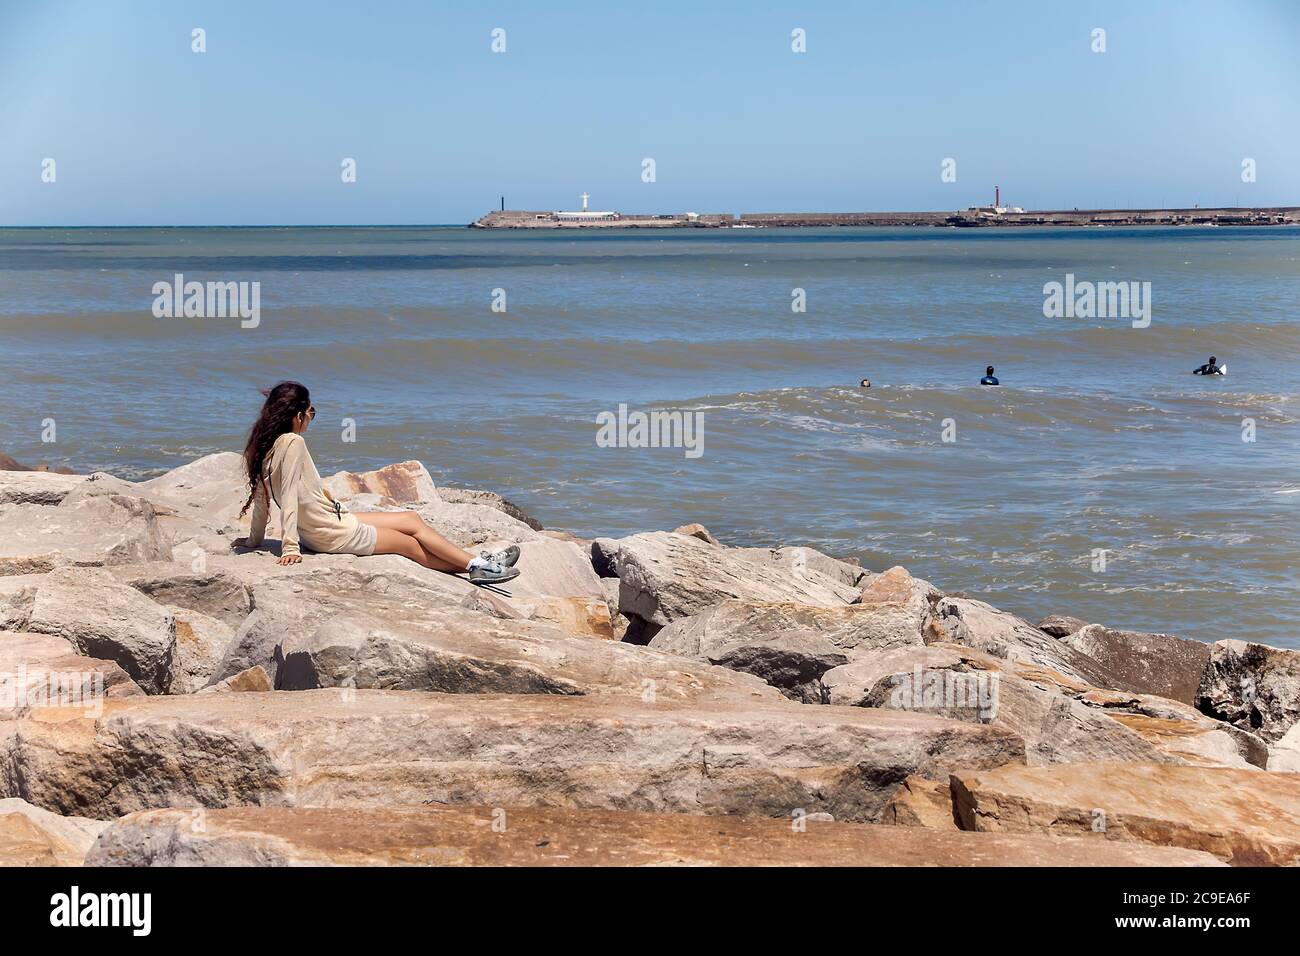 Woman on breakwater watching surfers in the sea off Mar del Plata, Buenos Aires Province, Argentina Stock Photo